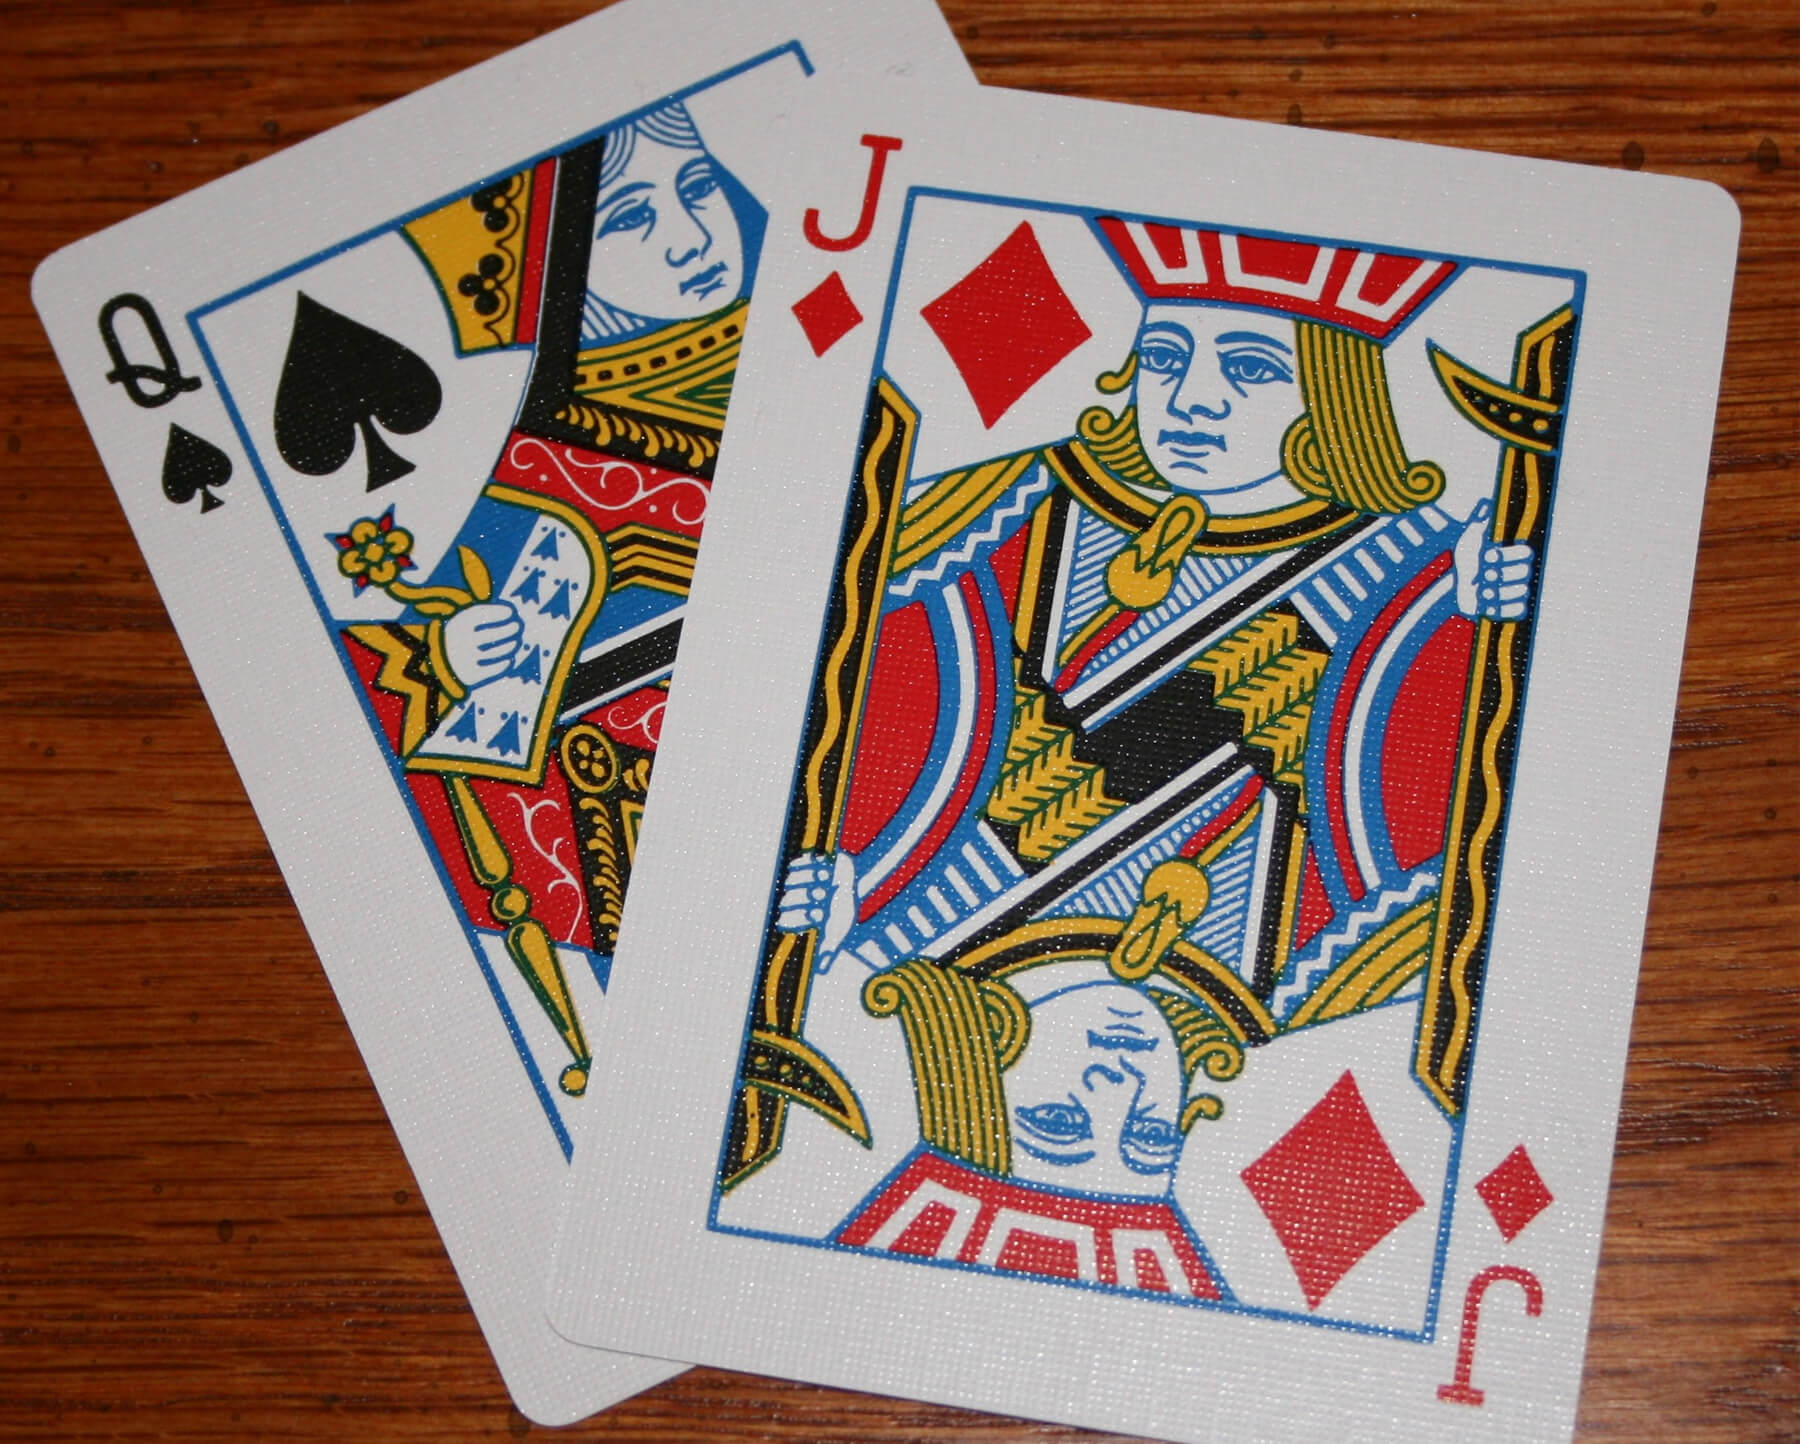 A queen of aces and jack of diamonds card.